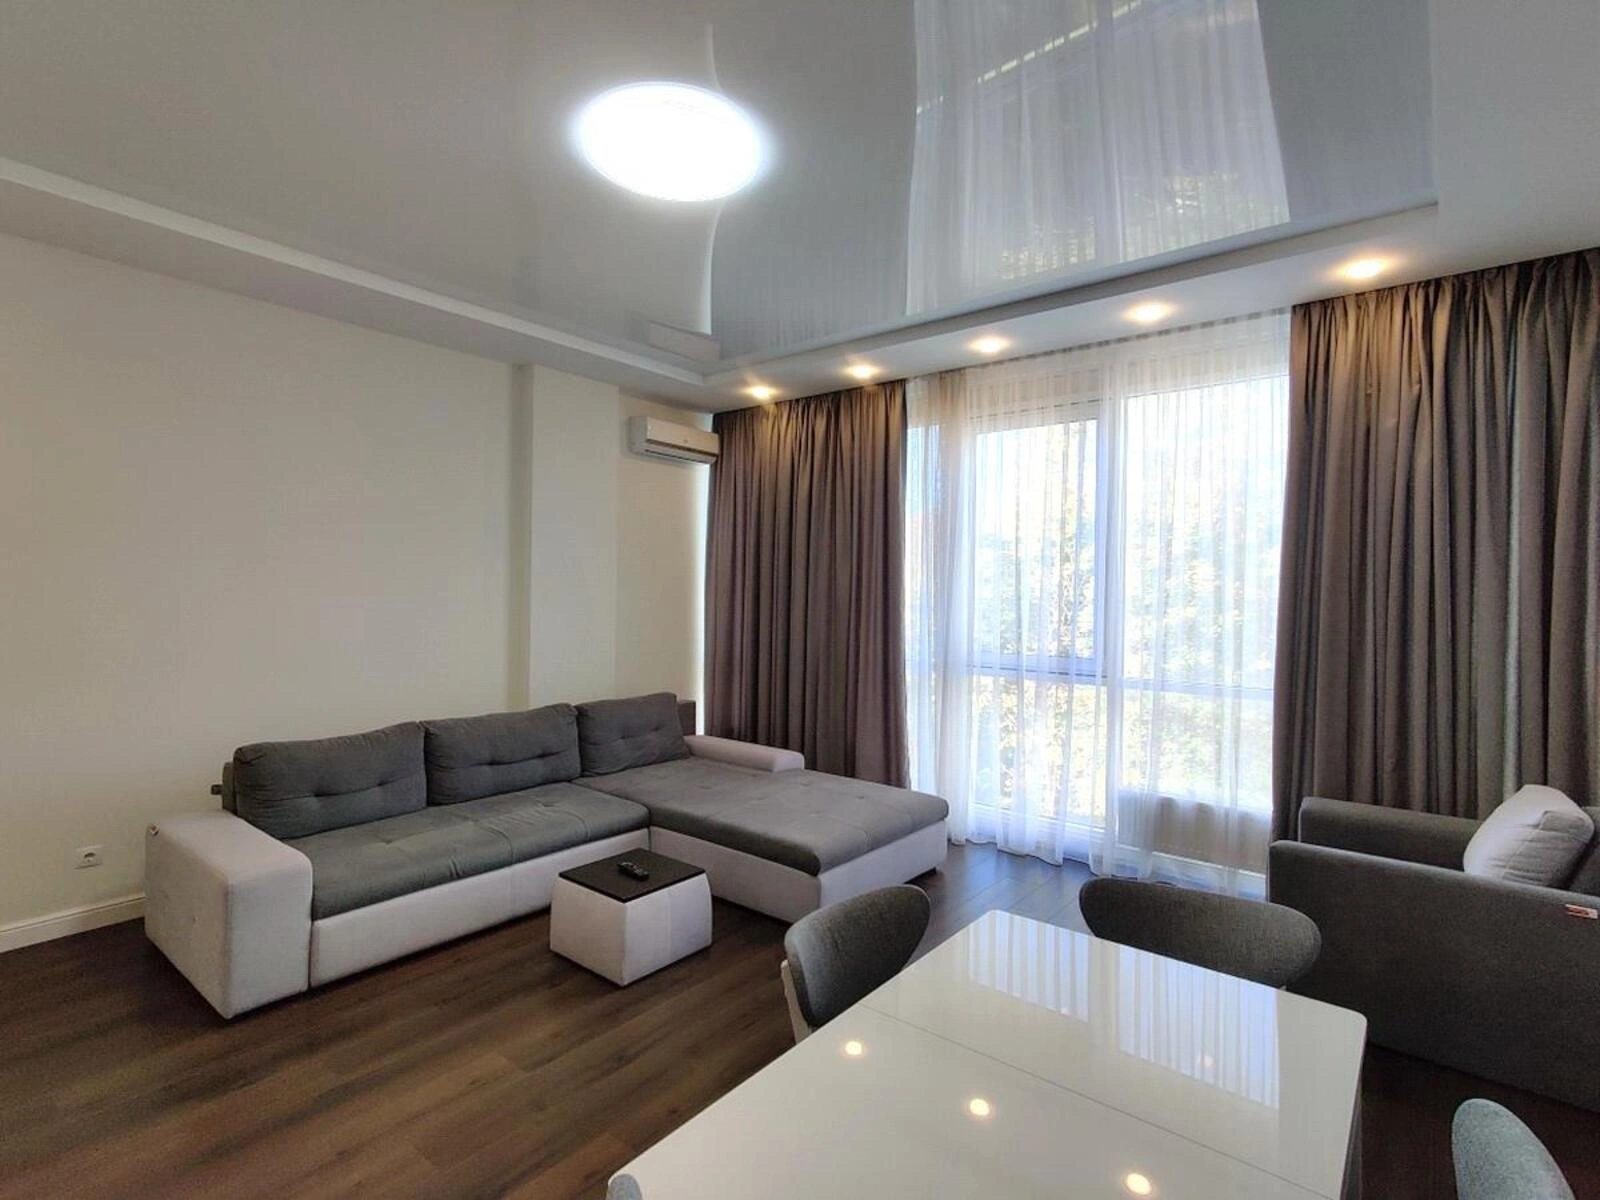 Apartments for sale. 3 rooms, 110 m², 4th floor/18 floors. 85, Frantsuzskyy b-r, Odesa. 